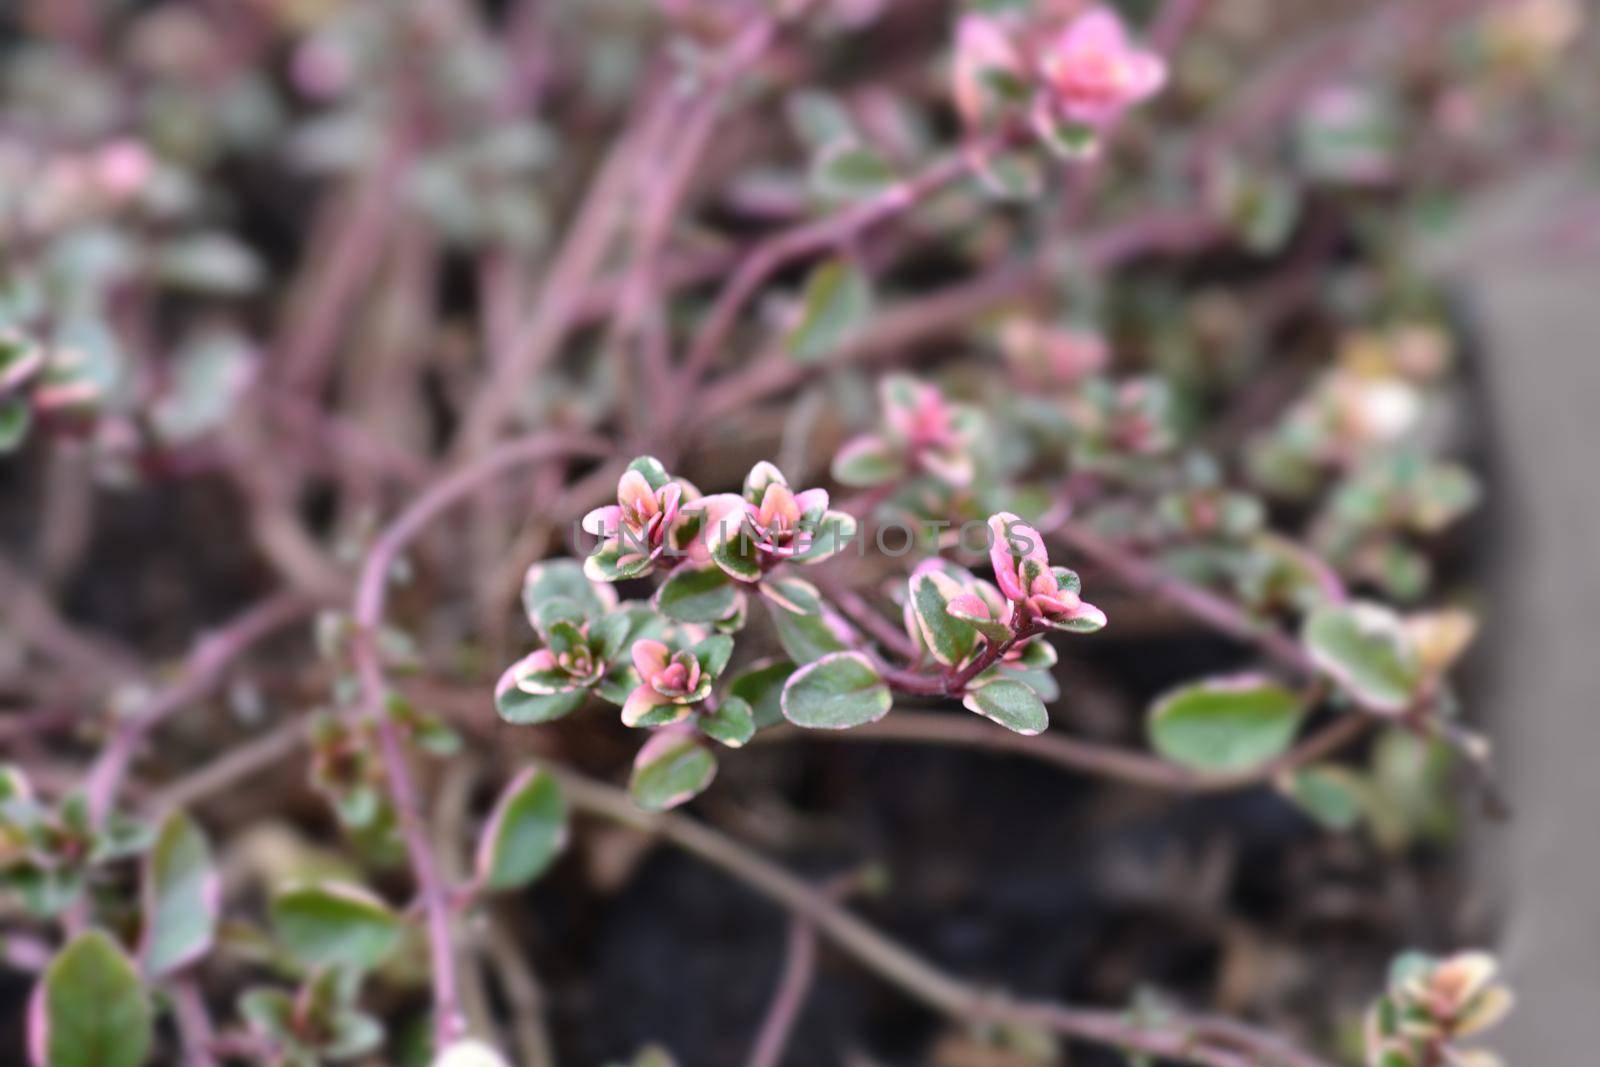 Foxley Thyme leaves - Latin name - Thymus pulegioides Foxley